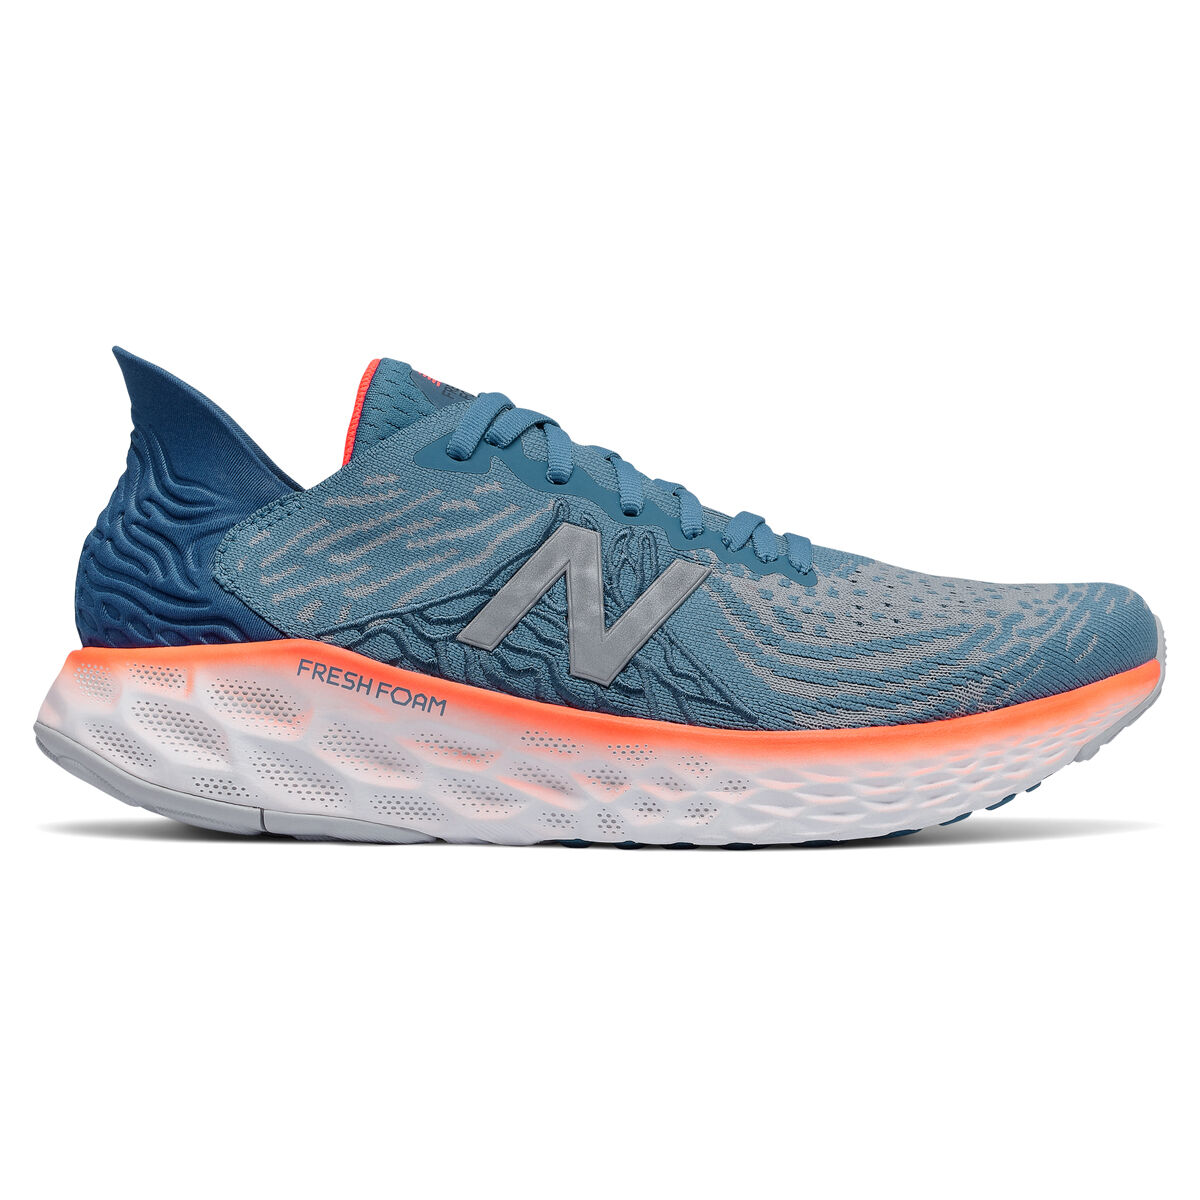 new balance clearance melbourne